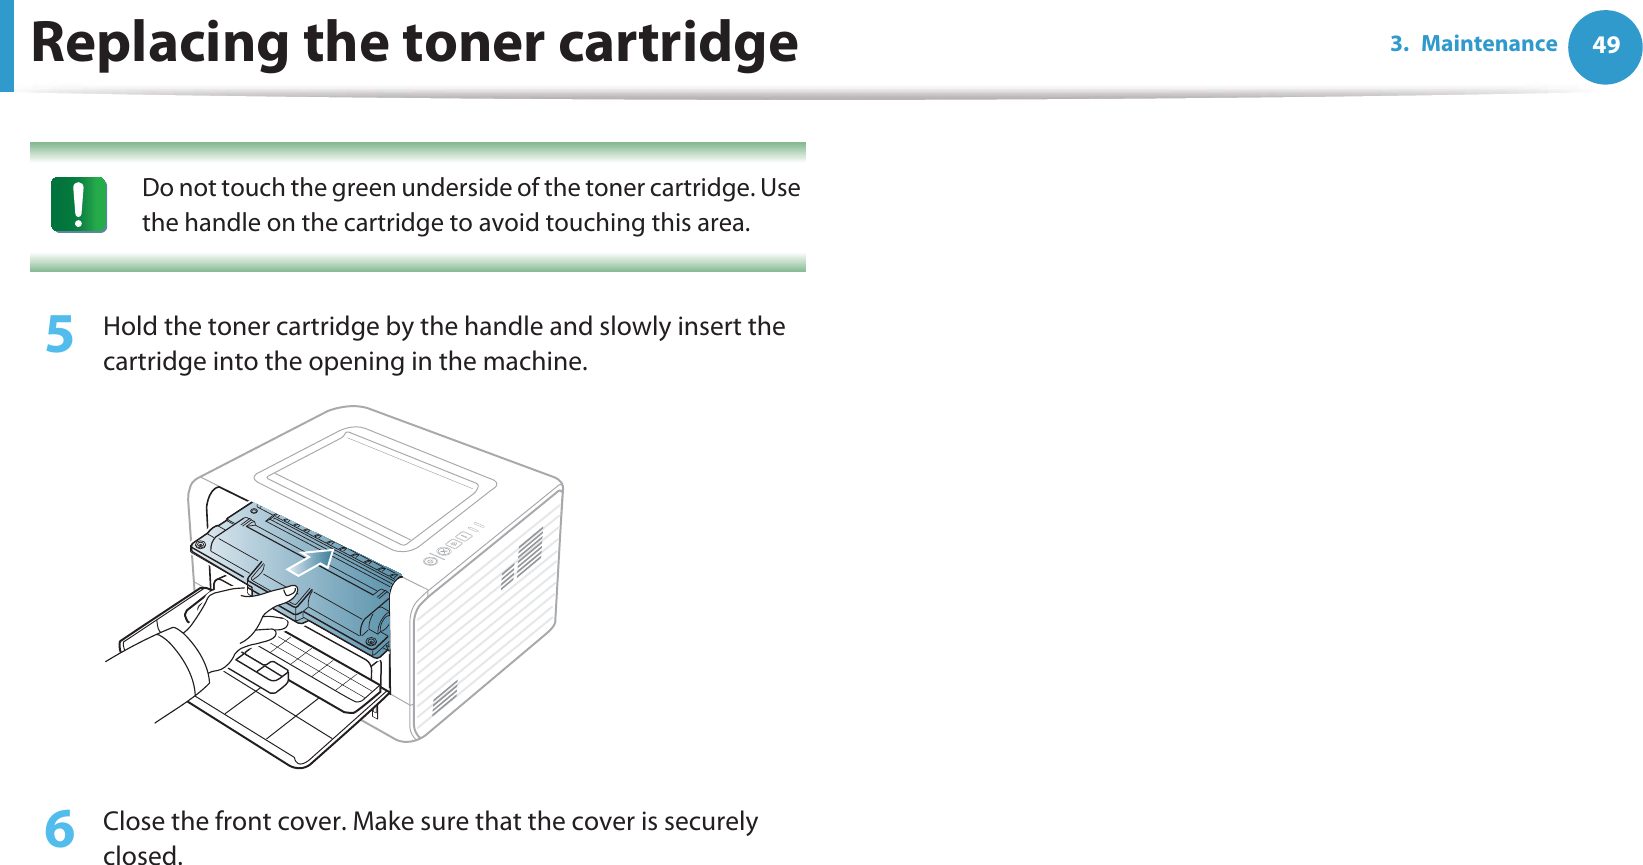 Replacing the toner cartridge 493. Maintenance Do not touch the green underside of the toner cartridge. Use the handle on the cartridge to avoid touching this area.  5  Hold the toner cartridge by the handle and slowly insert the cartridge into the opening in the machine. 6  Close the front cover. Make sure that the cover is securely closed. 